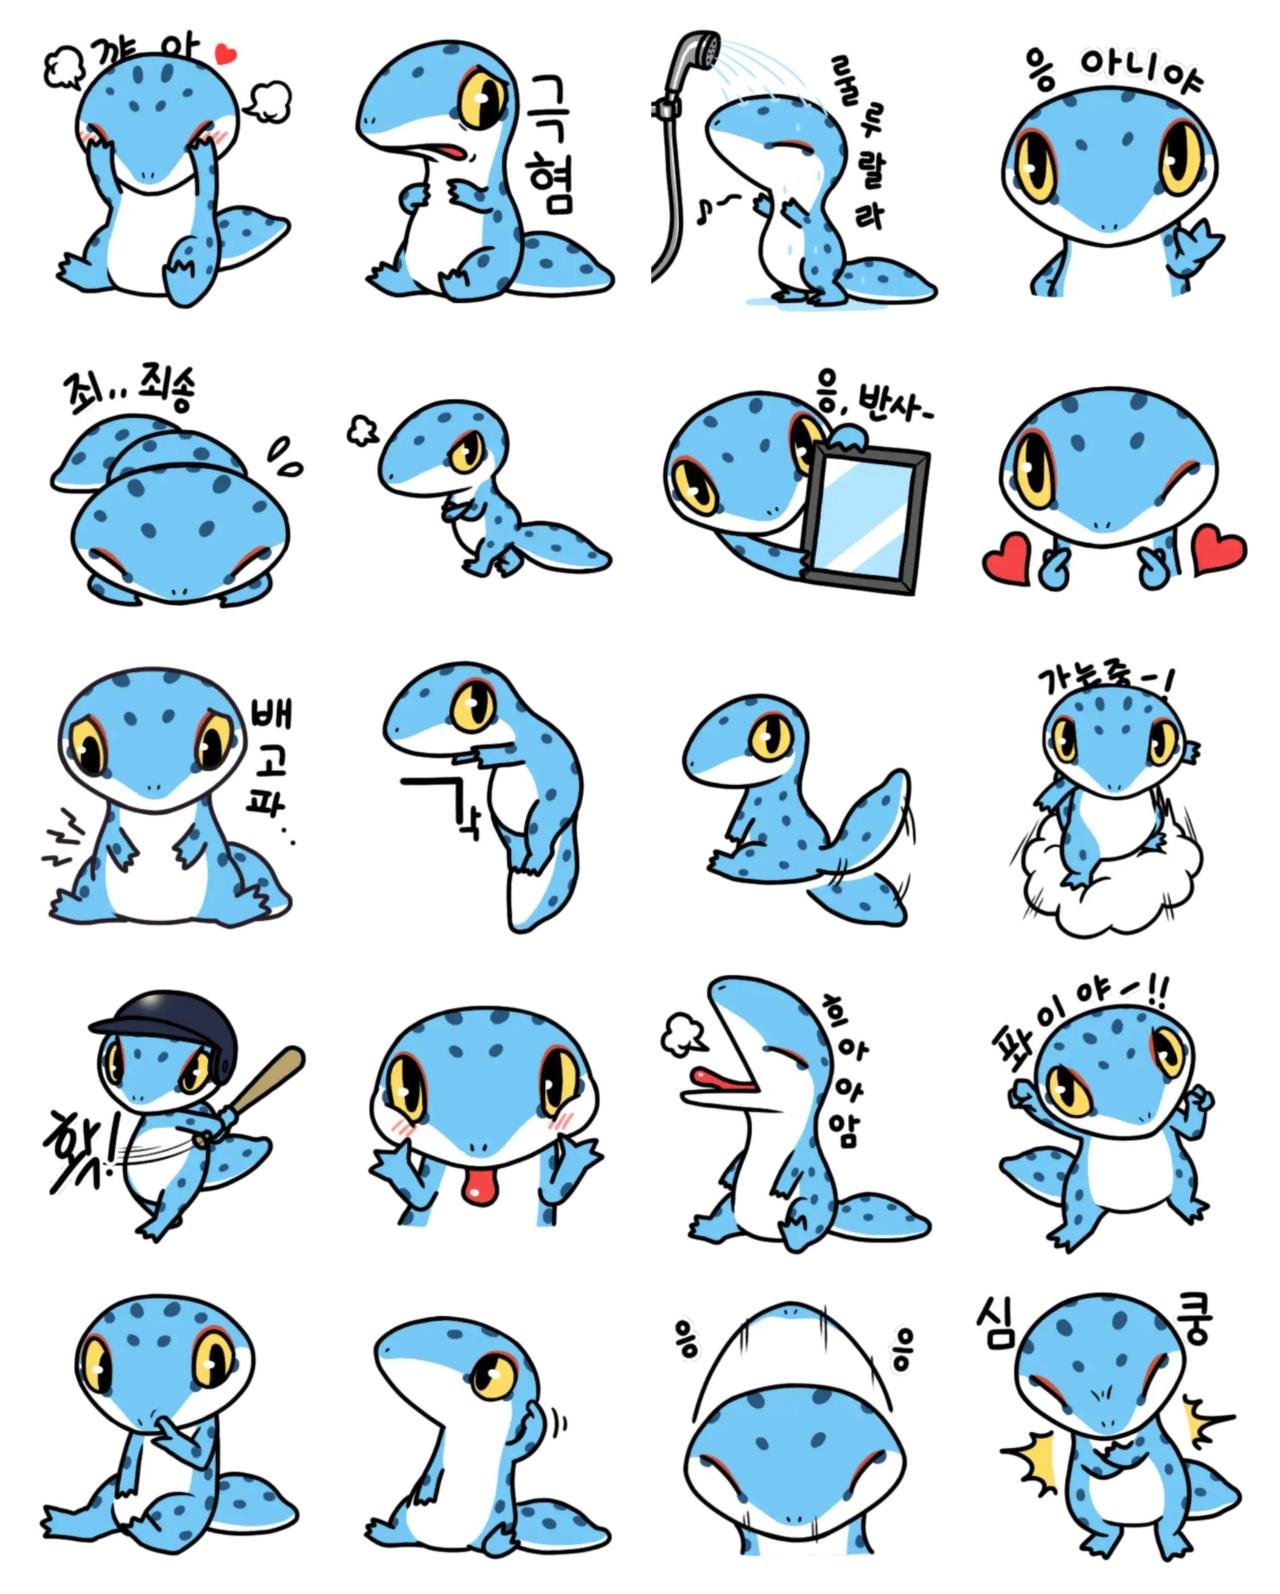 Cute Dinosaur Chichi Animals,People sticker pack for Whatsapp, Telegram, Signal, and others chatting and message apps